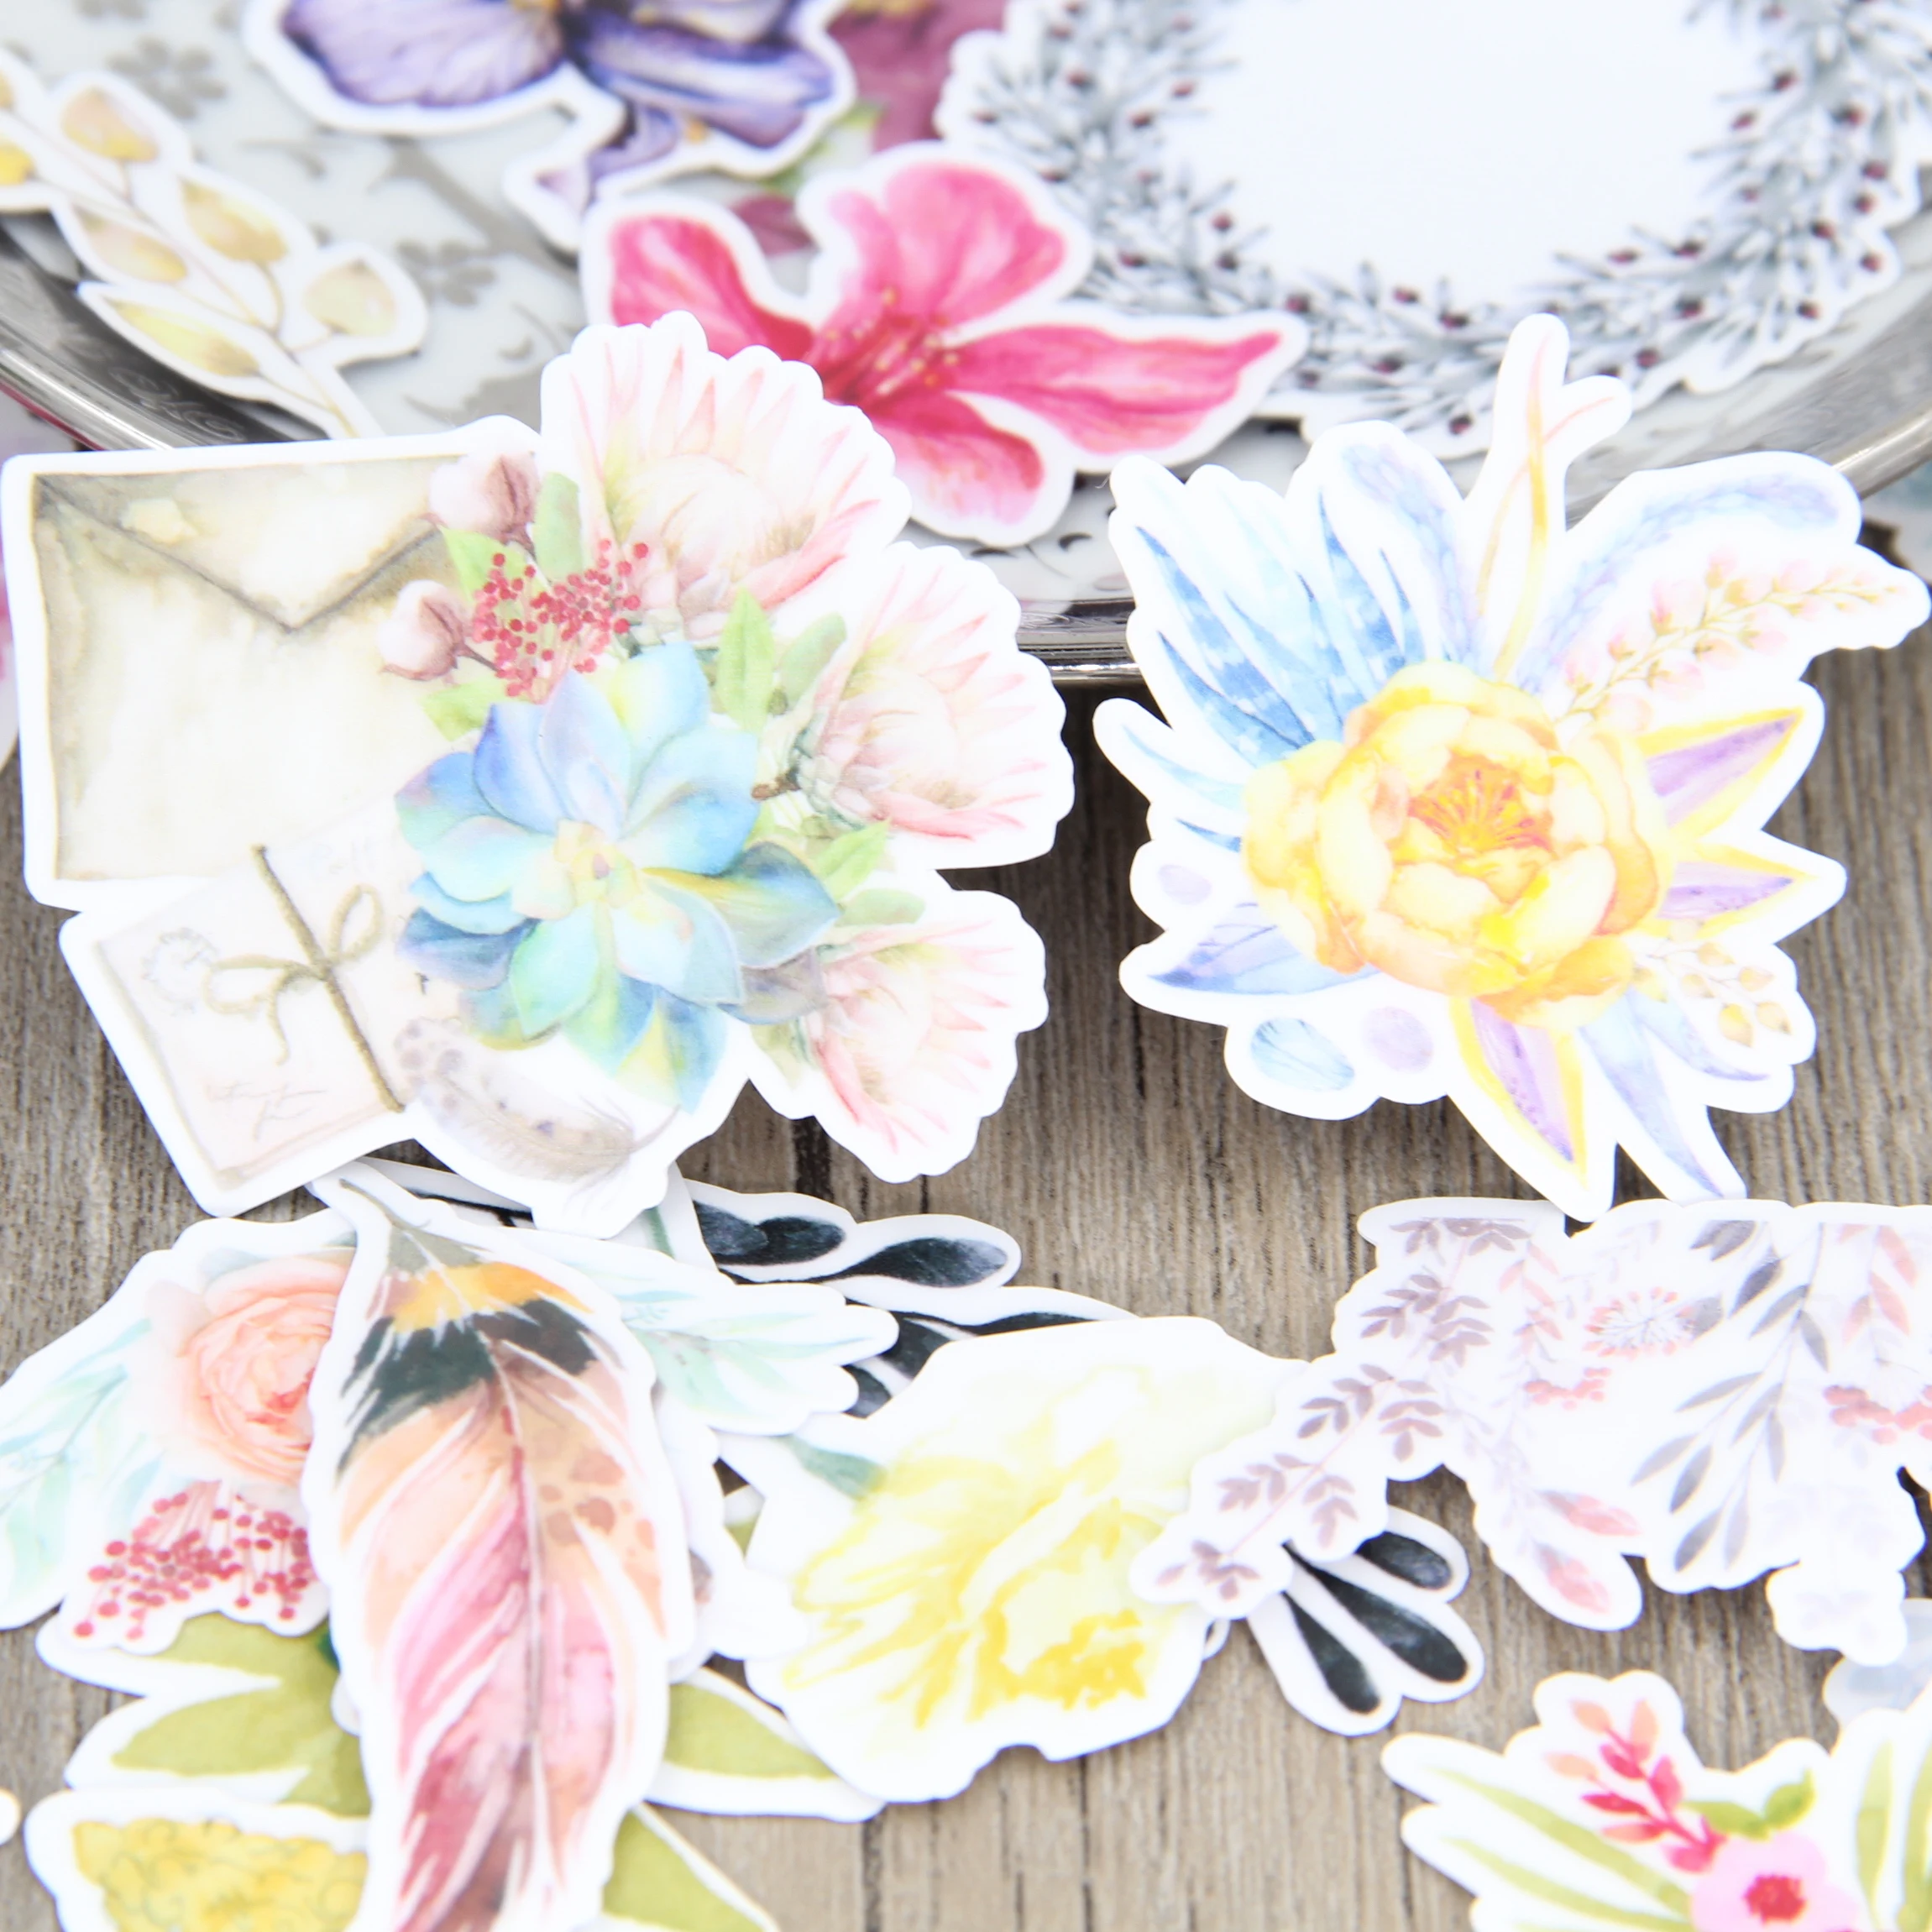 

32pcs Watercolor Drawing Flower Decorative DIY Scrapbooking Stickers for Laptop Hydro Flask Computer Notebook Diary Journal